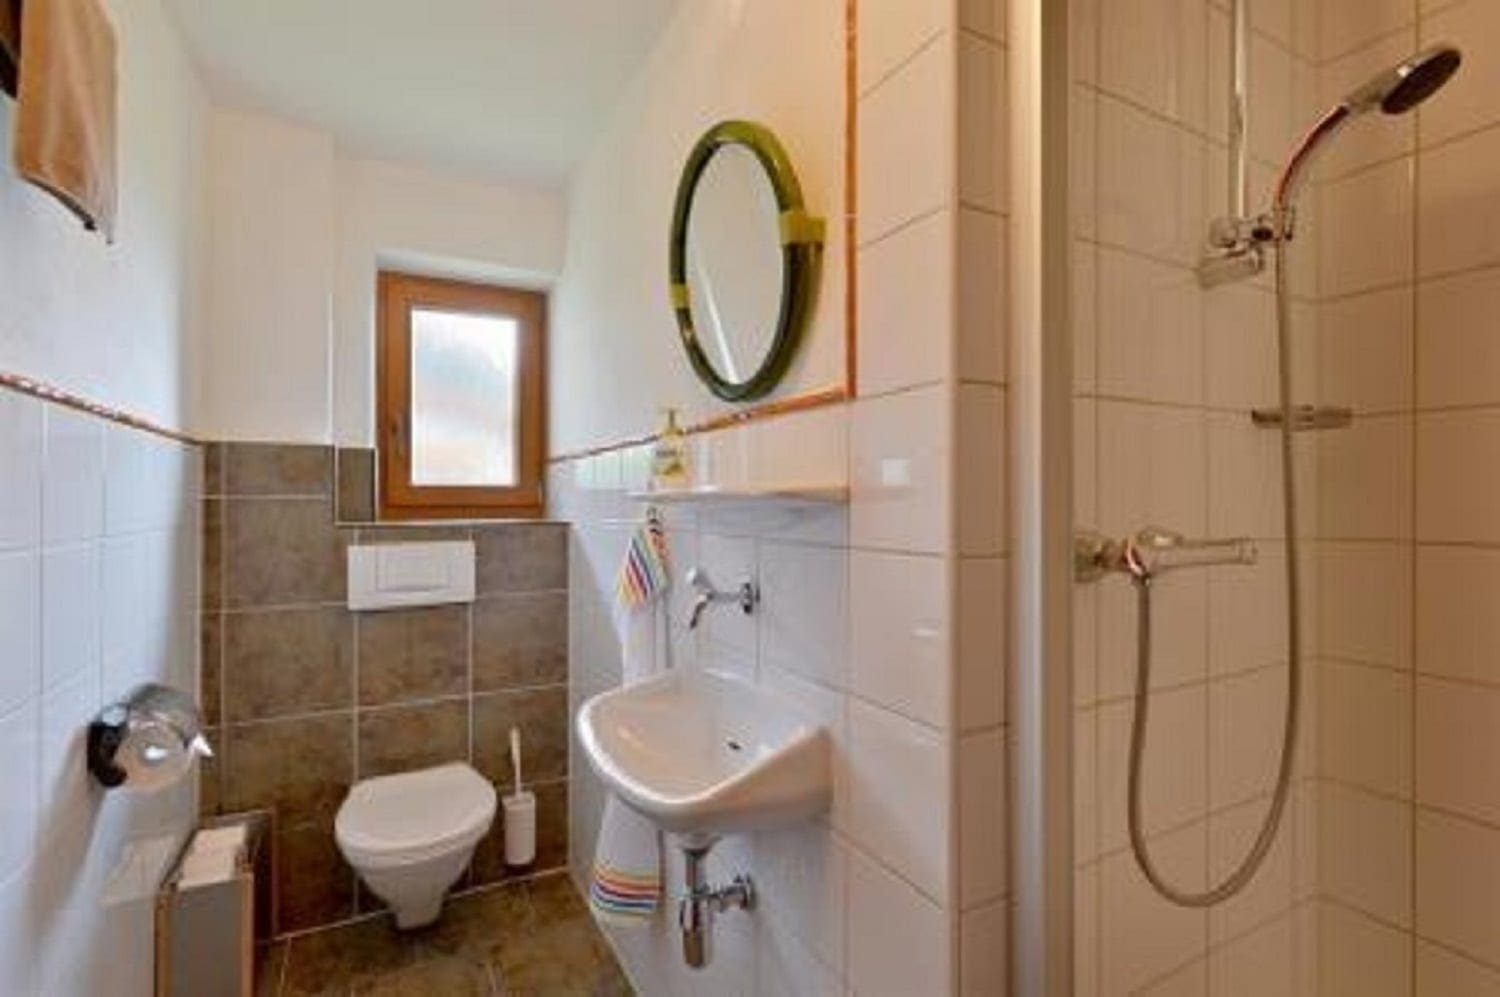 German Bathroom Fixtures… What is the Deal with Those Toilets?